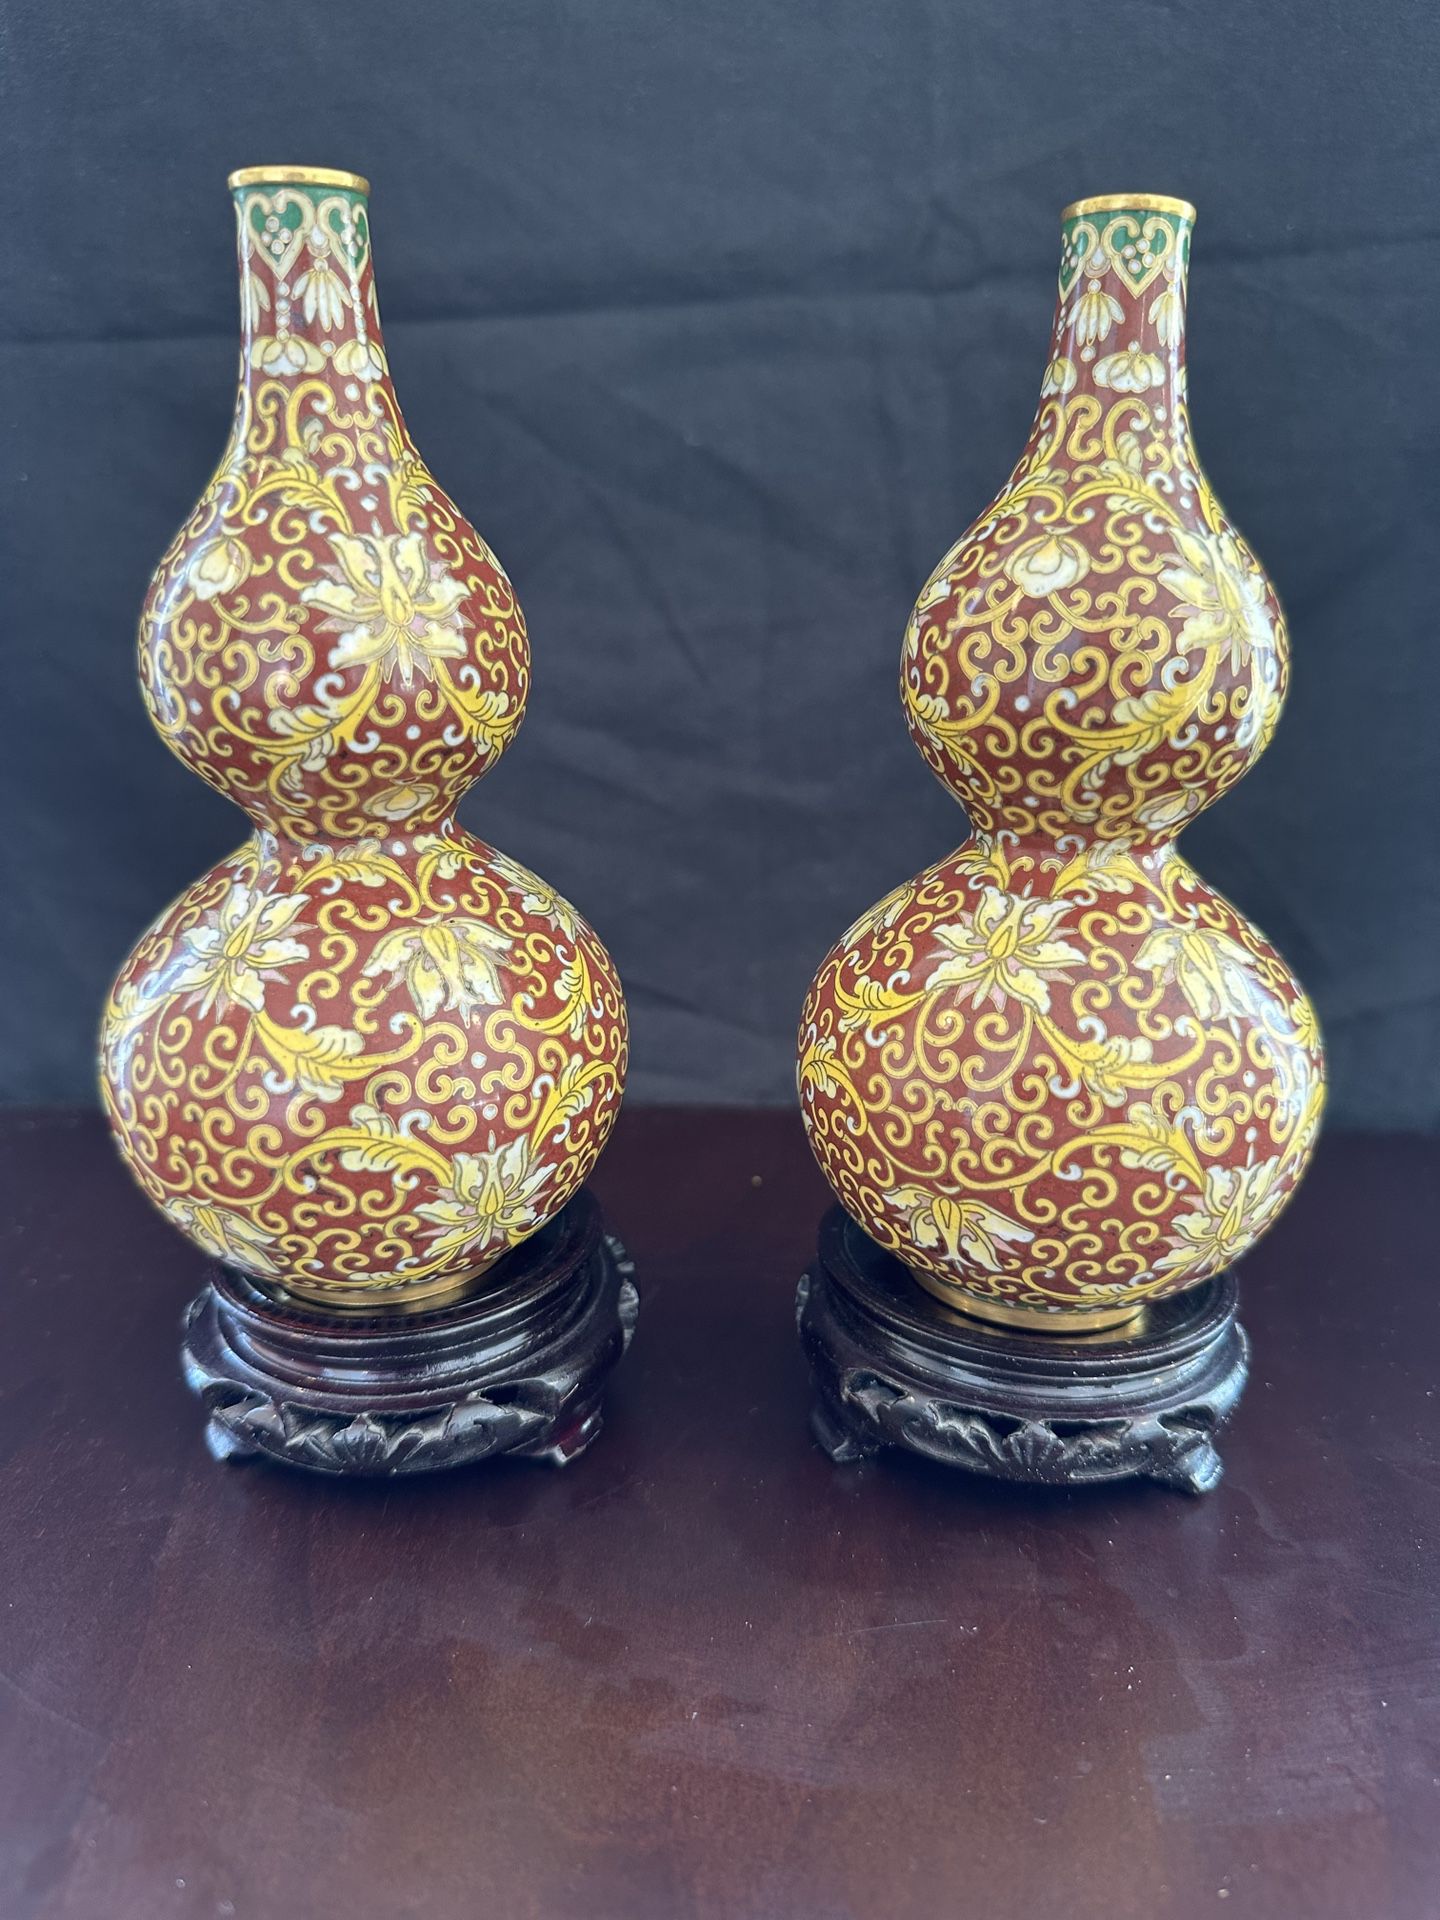 Vintage Chinese Qing/Ch’ing Dynasty Cloisonne Enamel Double Bulb Vase Pair